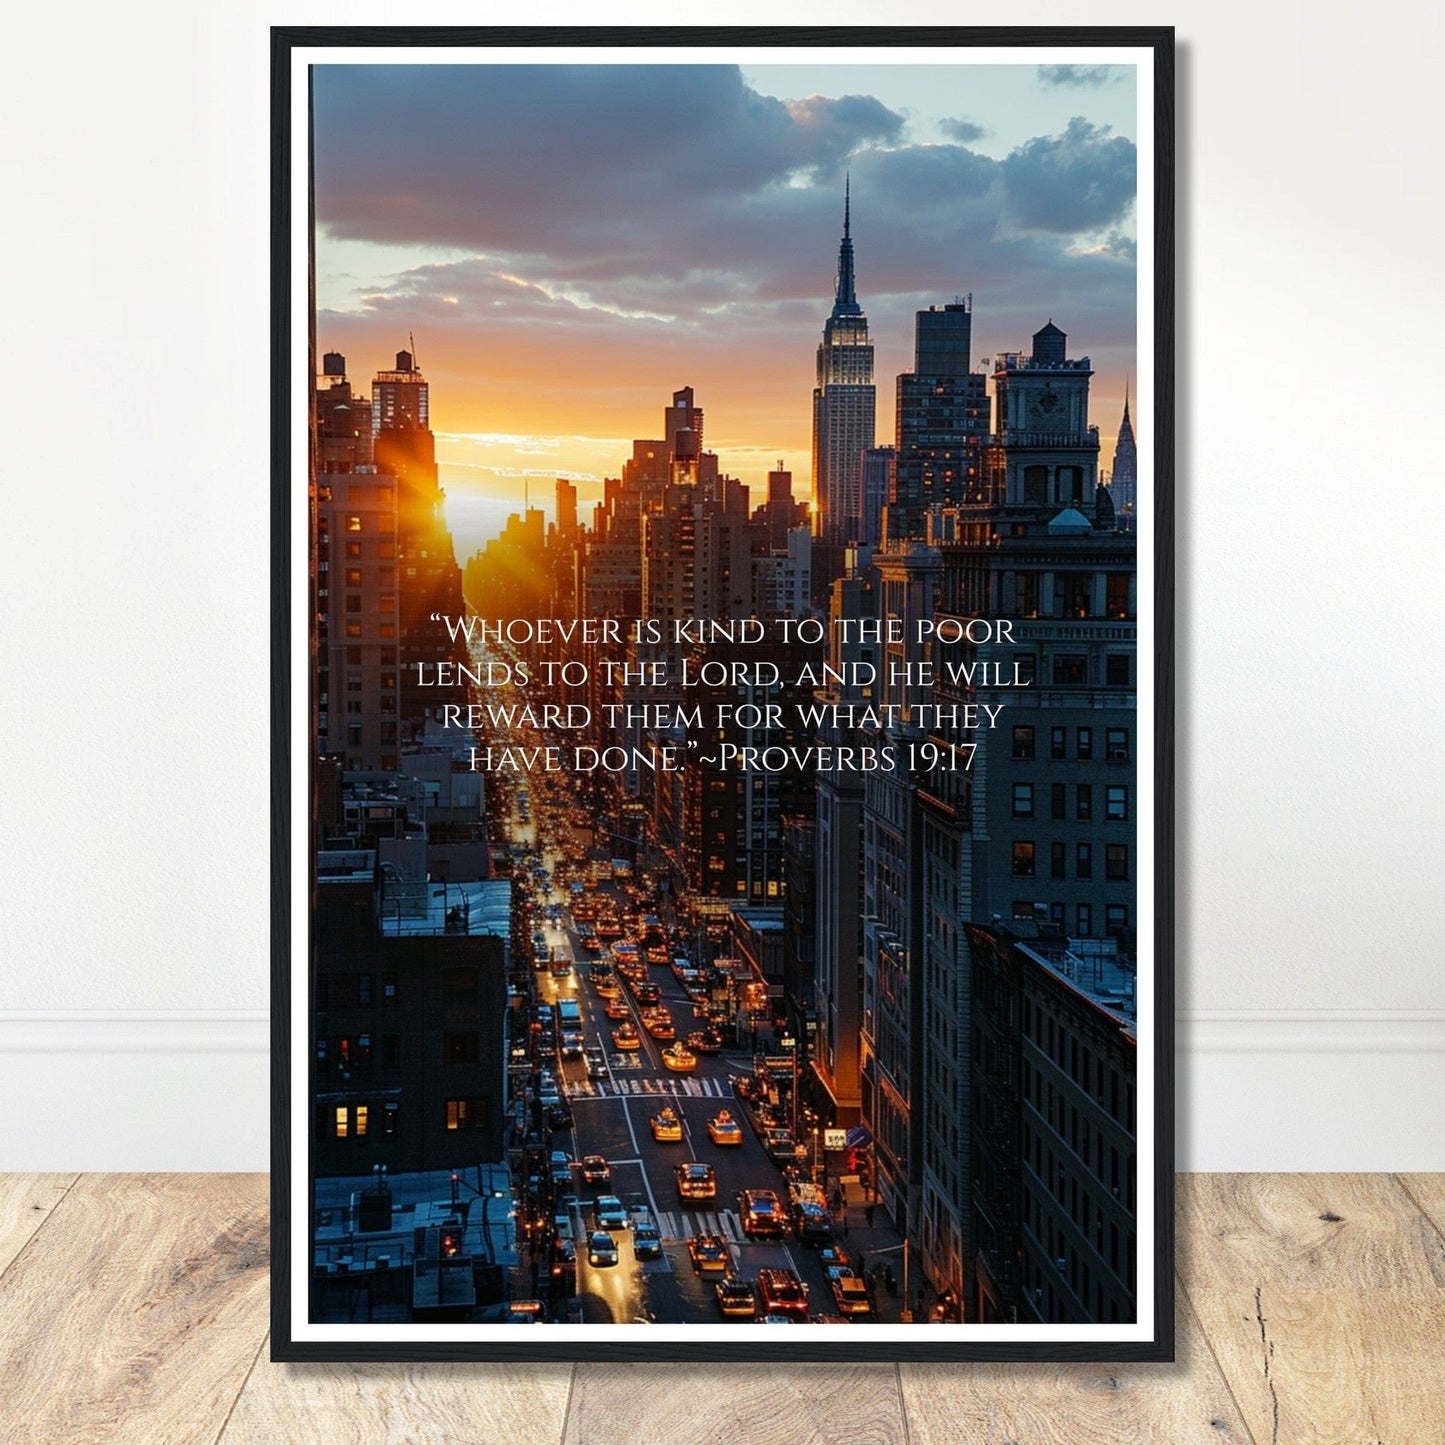 Coffee With My Father Print Material 60x90 cm / 24x36″ / Premium Matte Paper Wooden Framed Poster / Black frame Framed Template